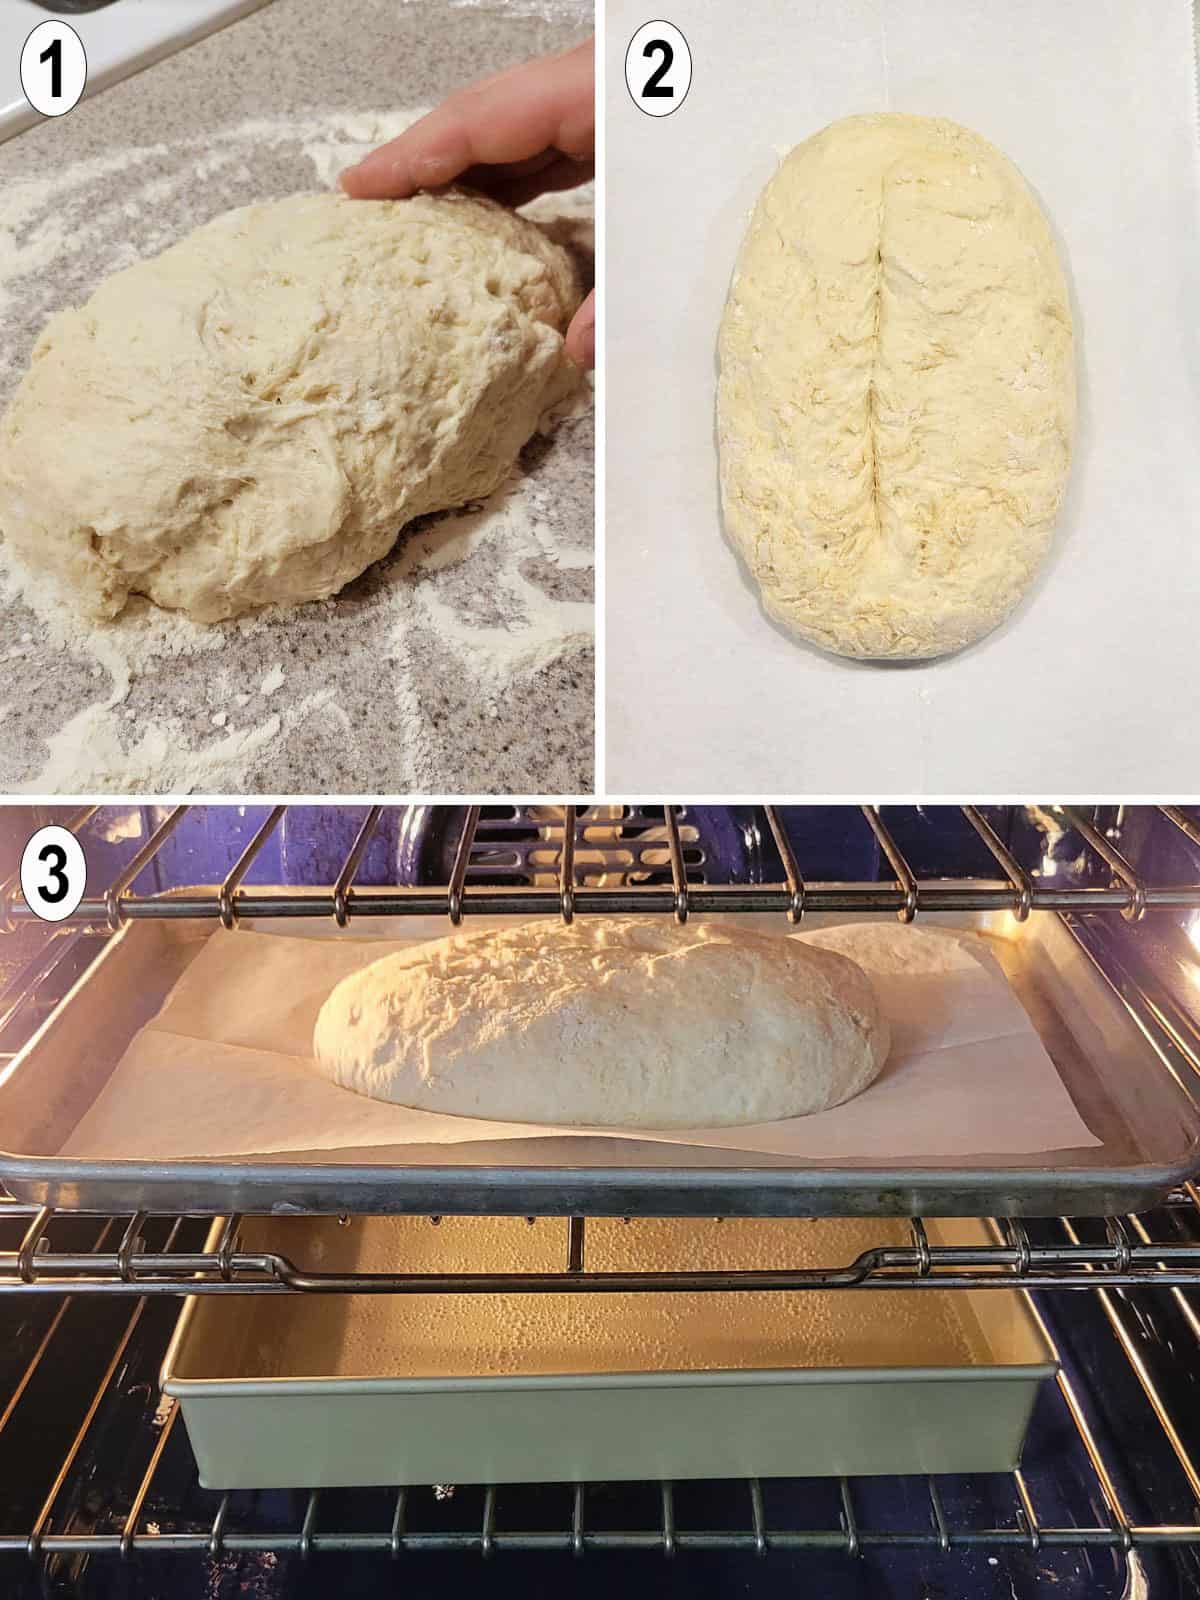 dough formed into a loaf and placed in oven